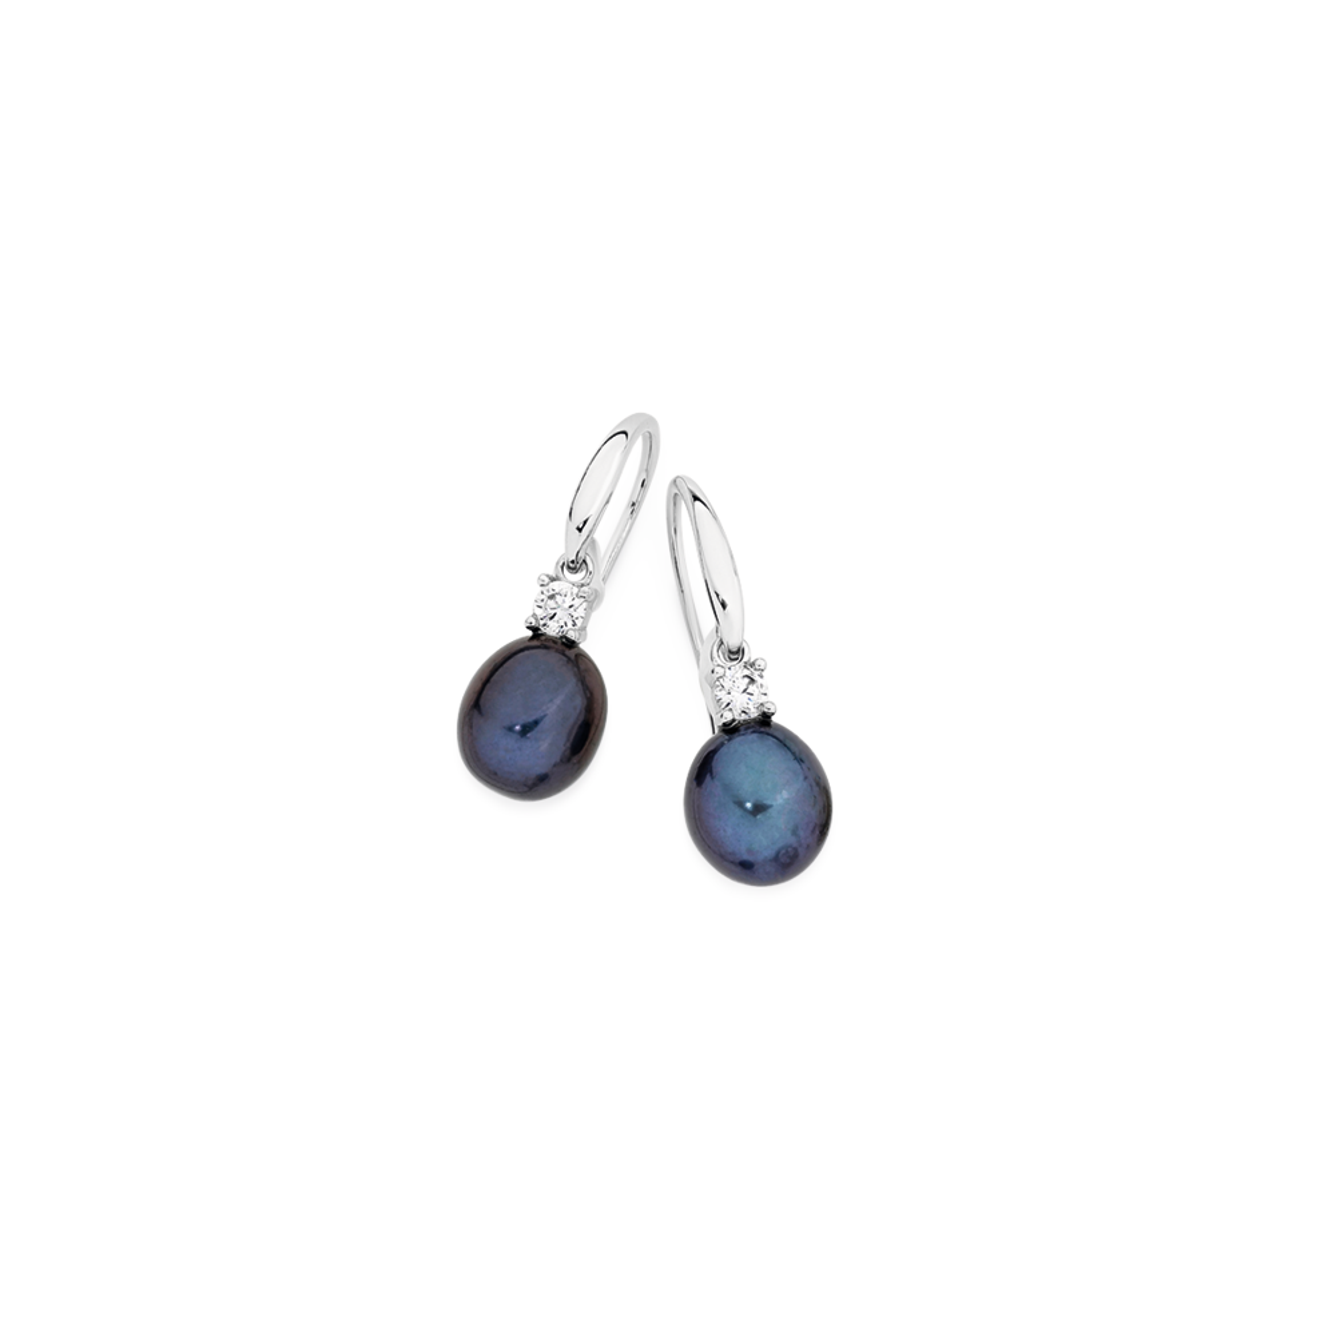 Earrings | Angus and Coote